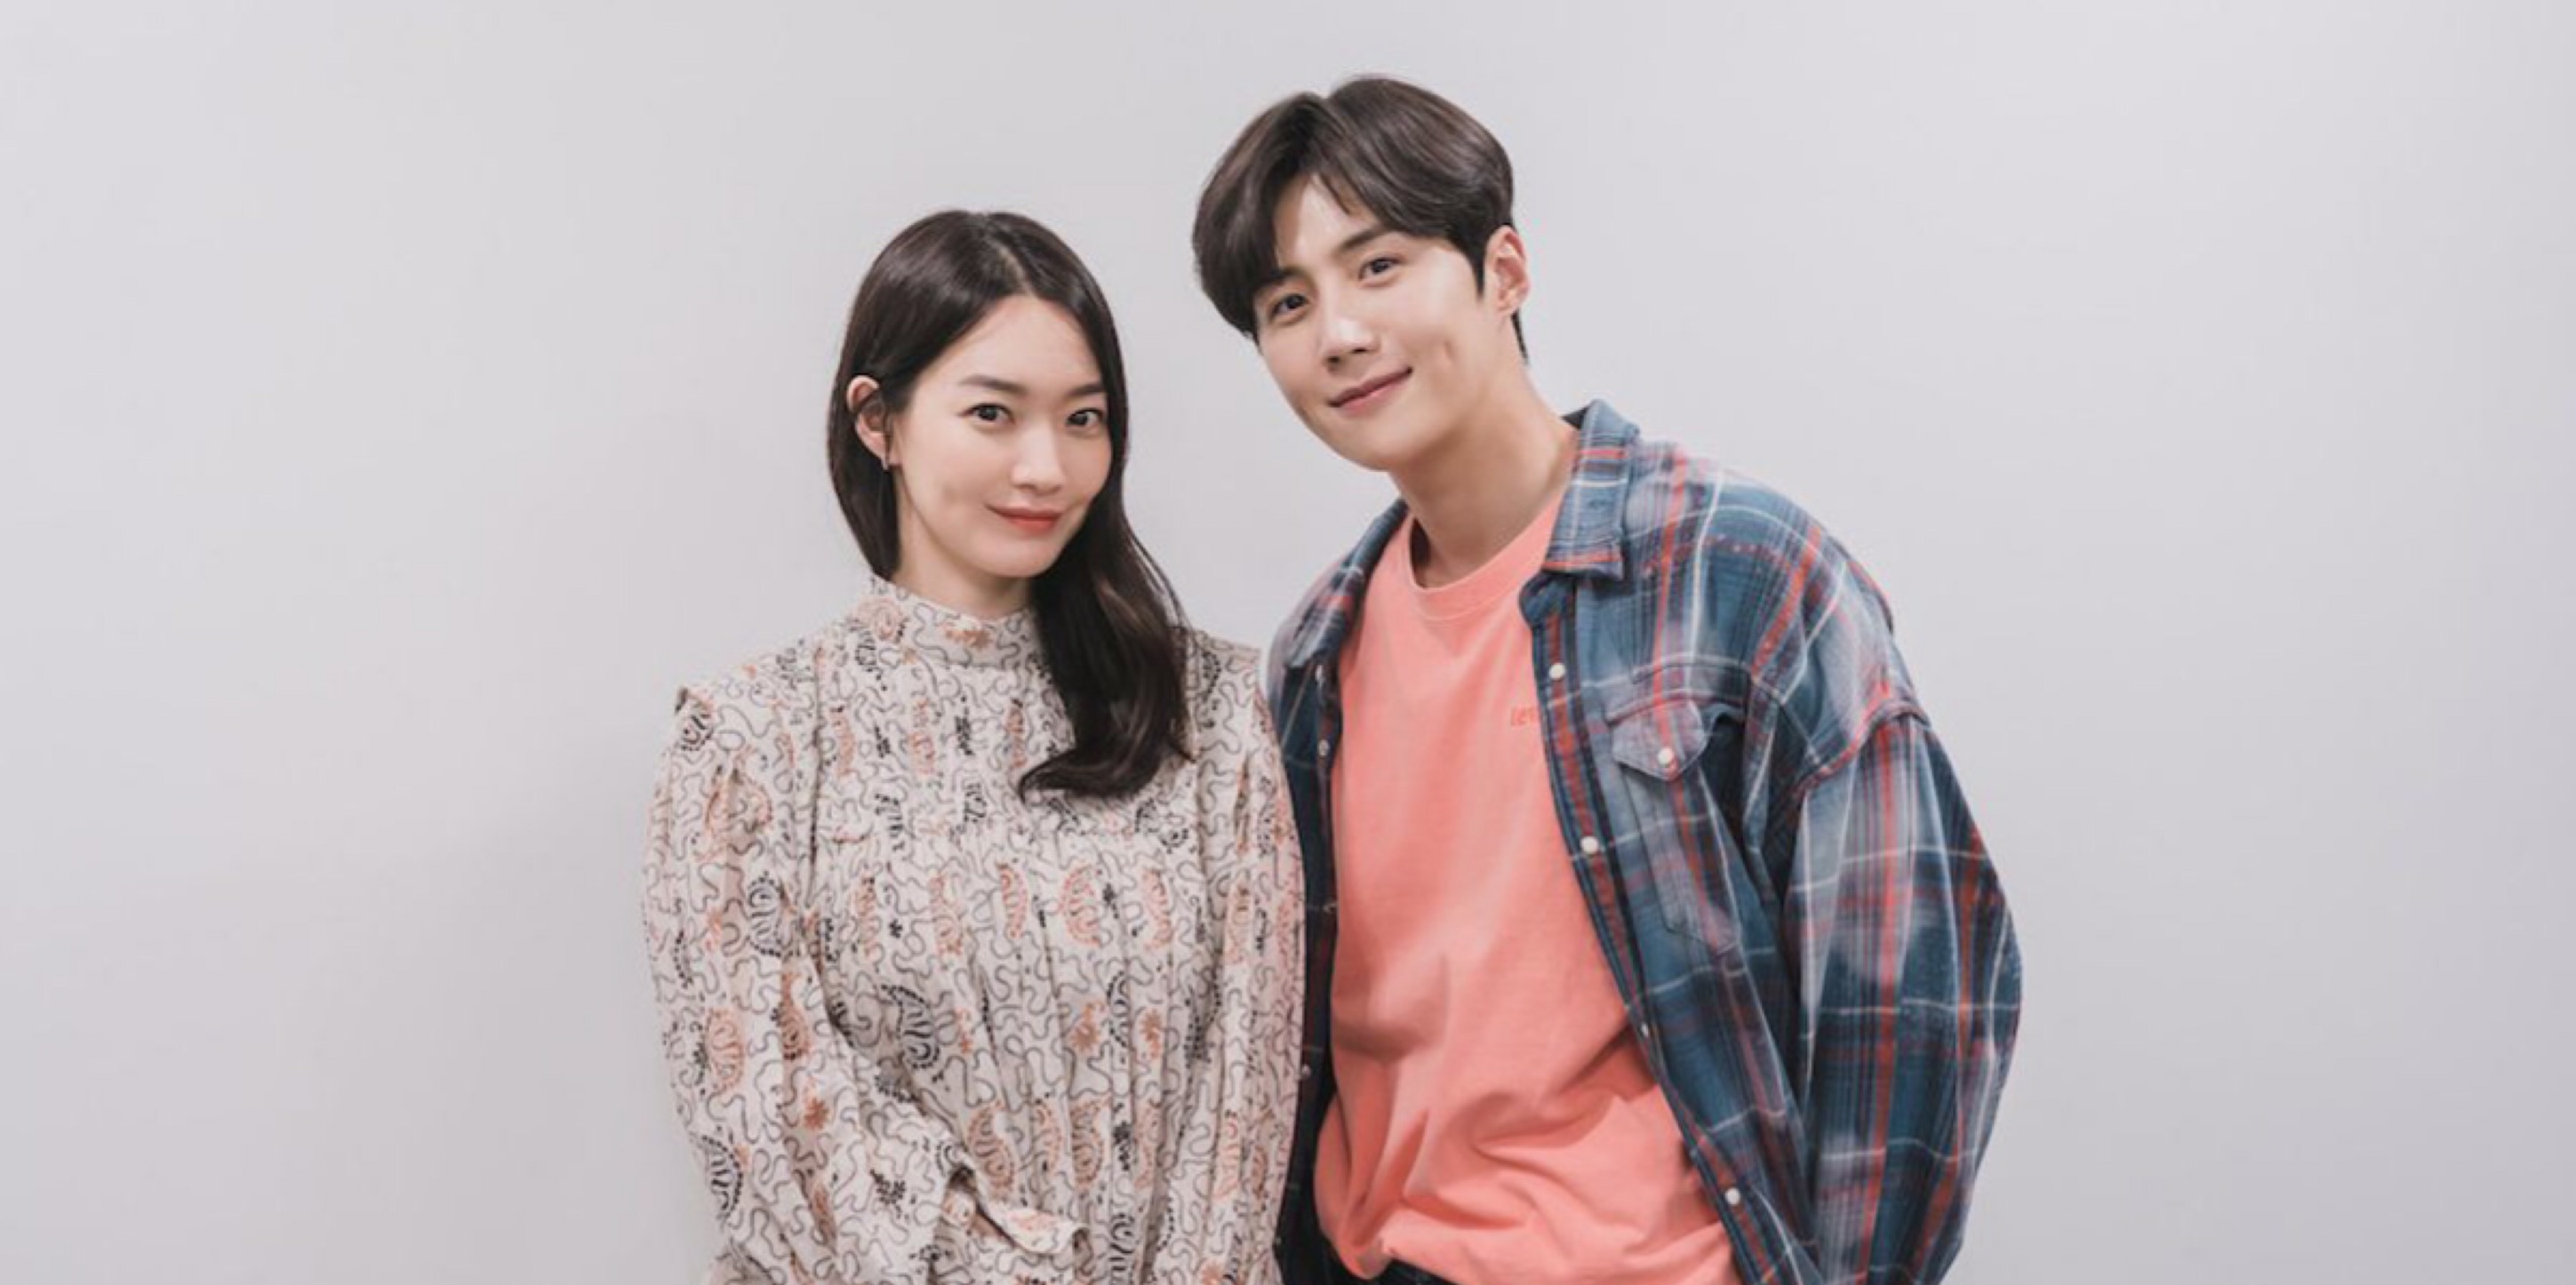 Dimples Couple, the Cast of Korean Drama 'Hometown Cha-Cha-Cha', Looks  Sweet in ELLE Magazine